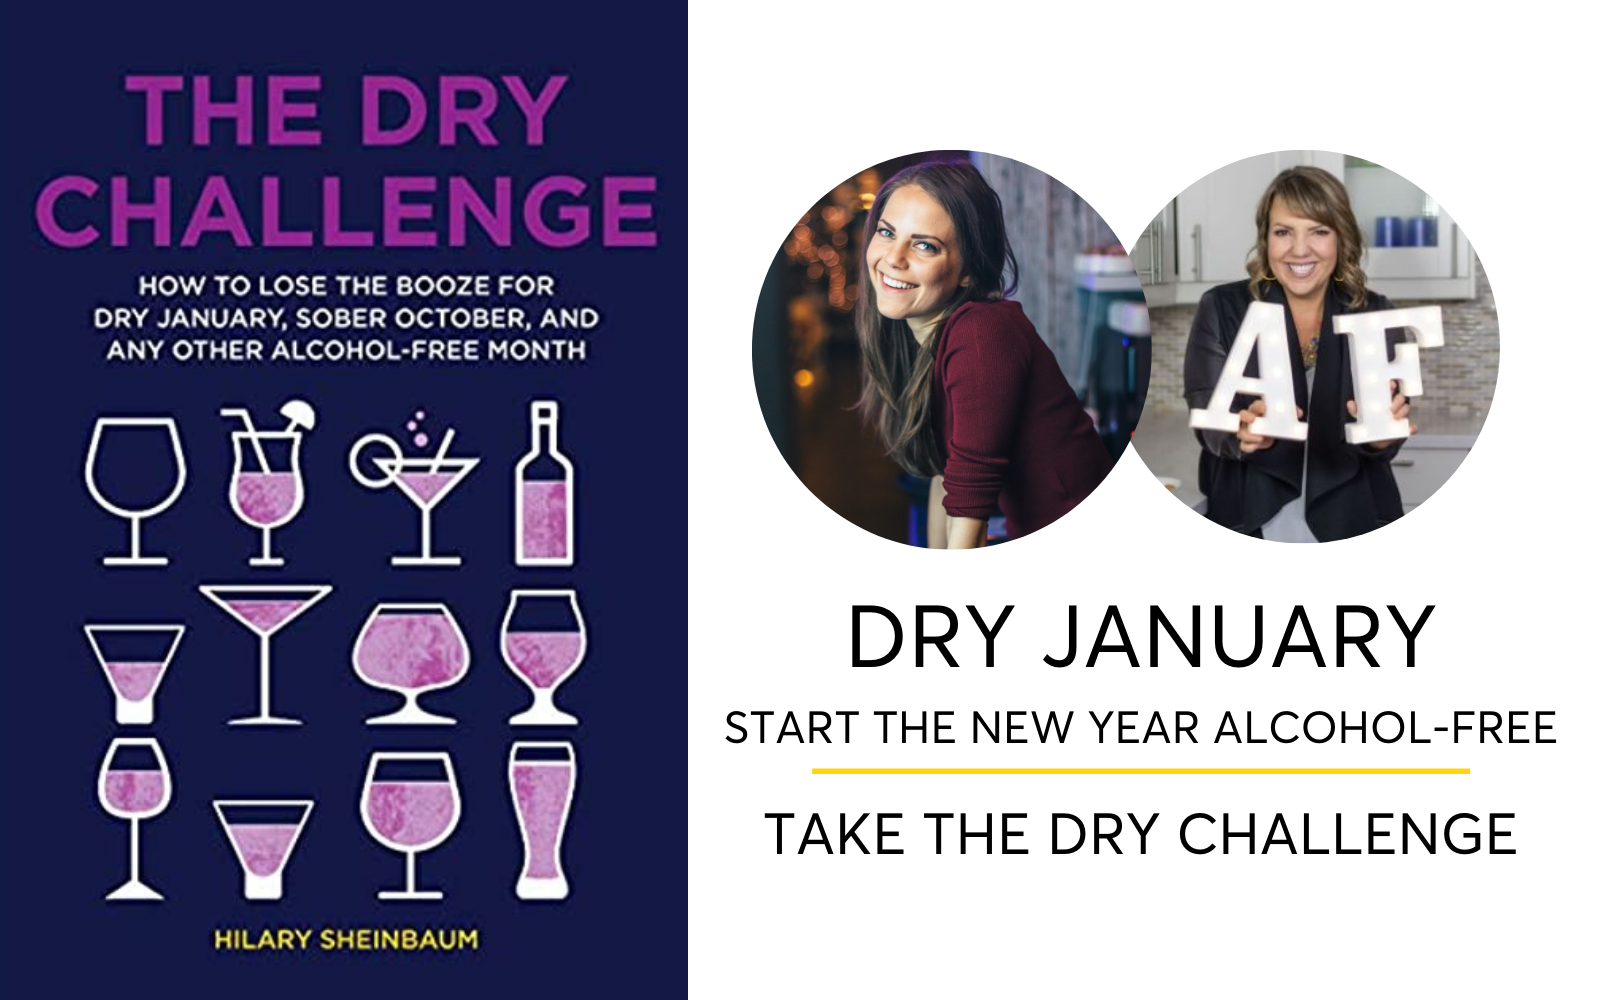 Dry January: Start The New Year Alcohol-Free